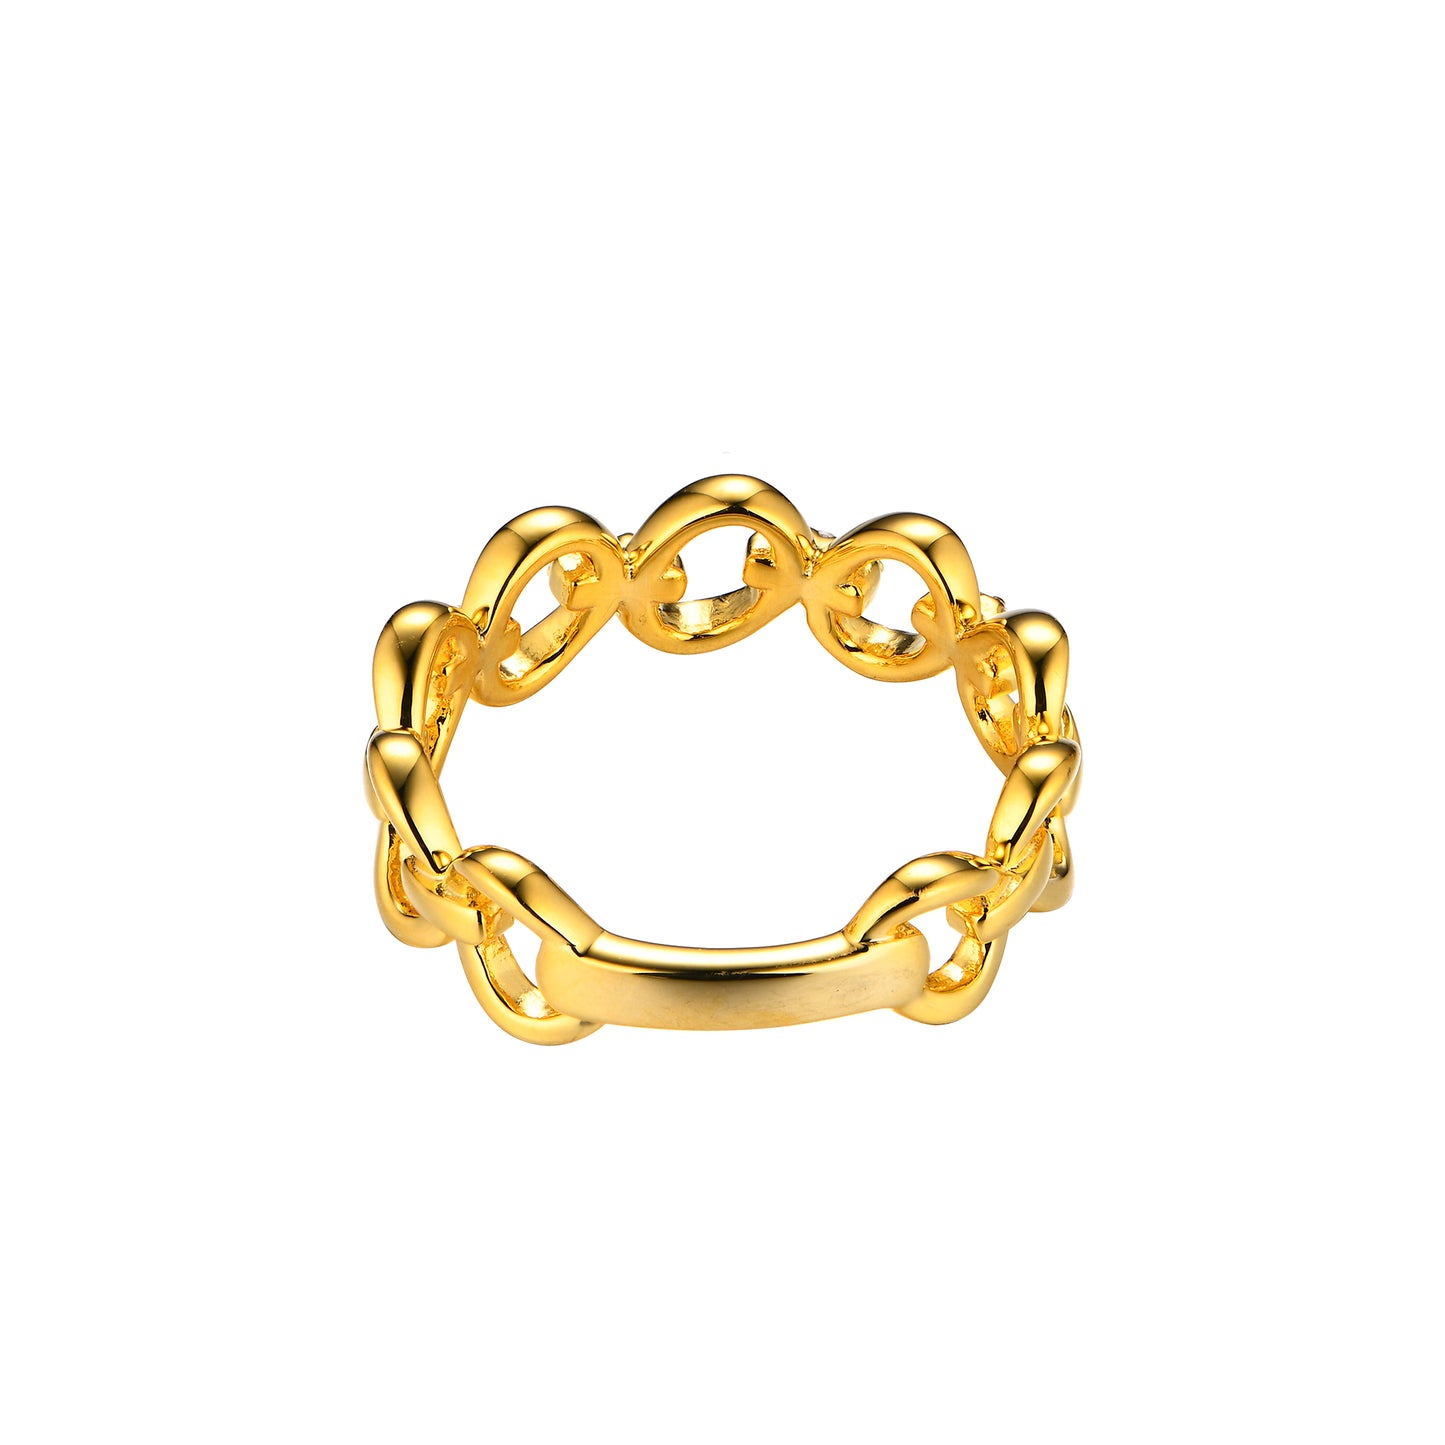 Intricate Chain-Link Ring with Dainty Accents